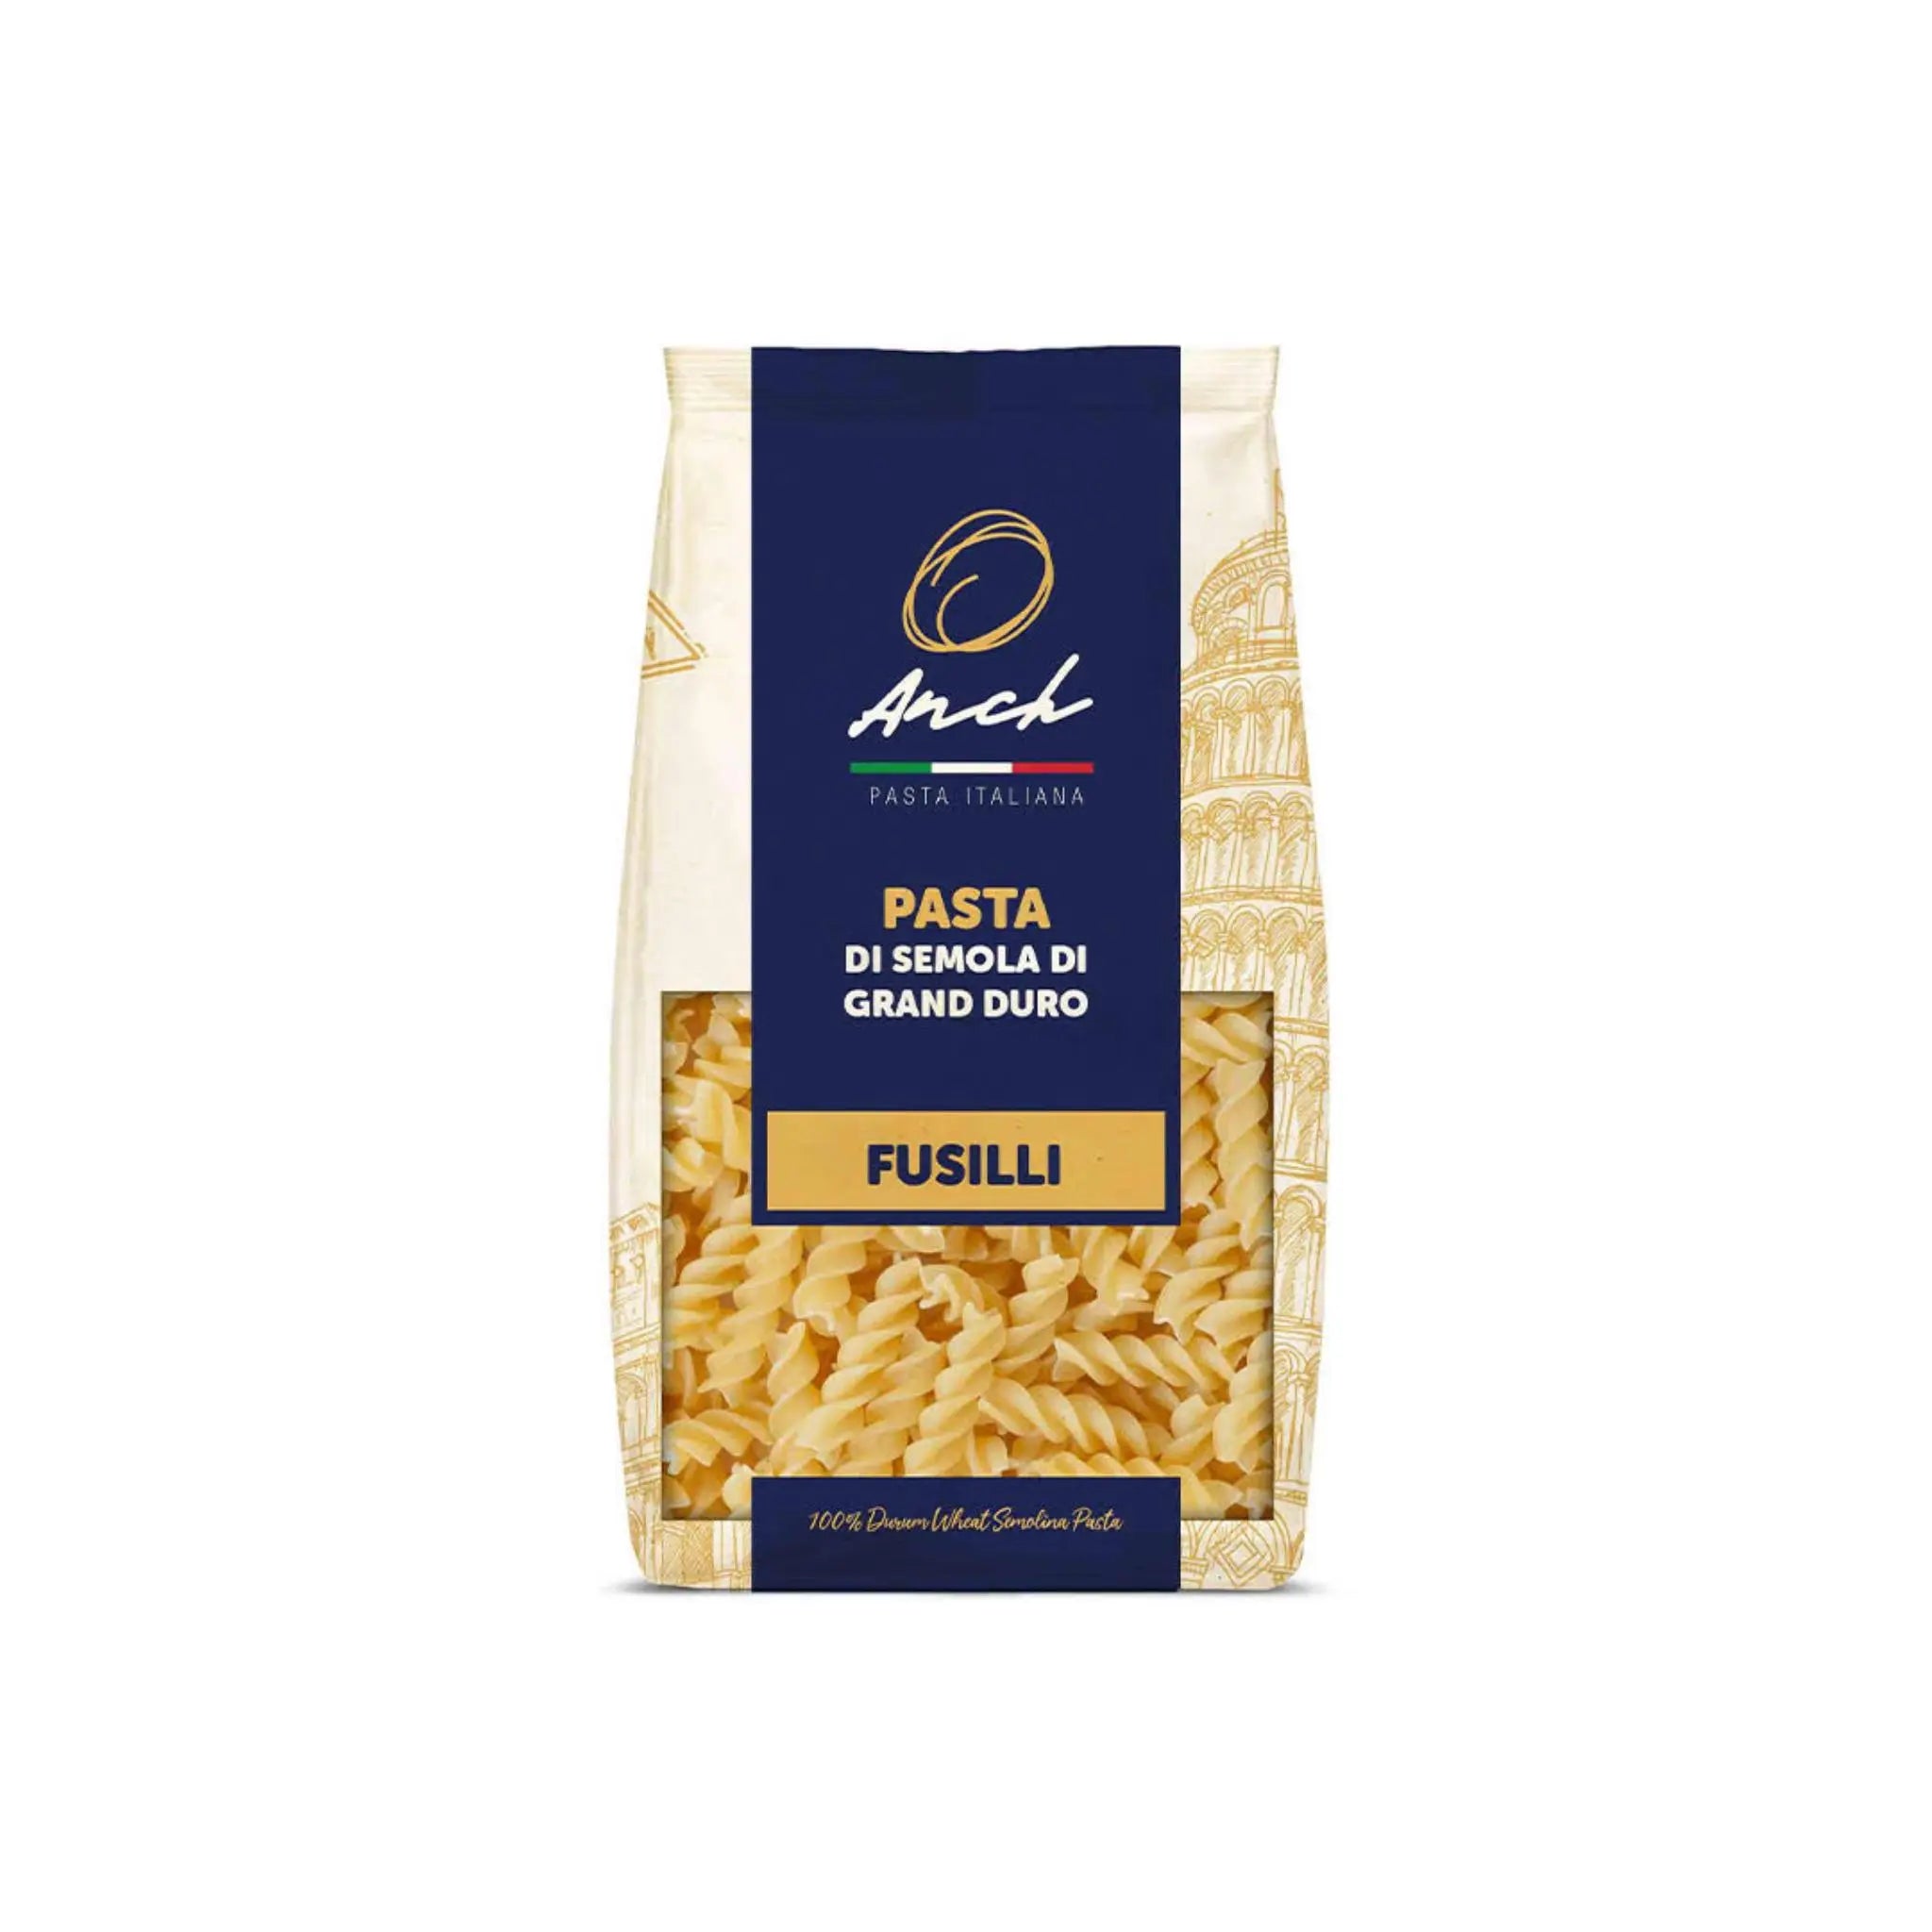 PASTA FUSSILLI 400 GM ANCH - Pack of 20 Marino.AE